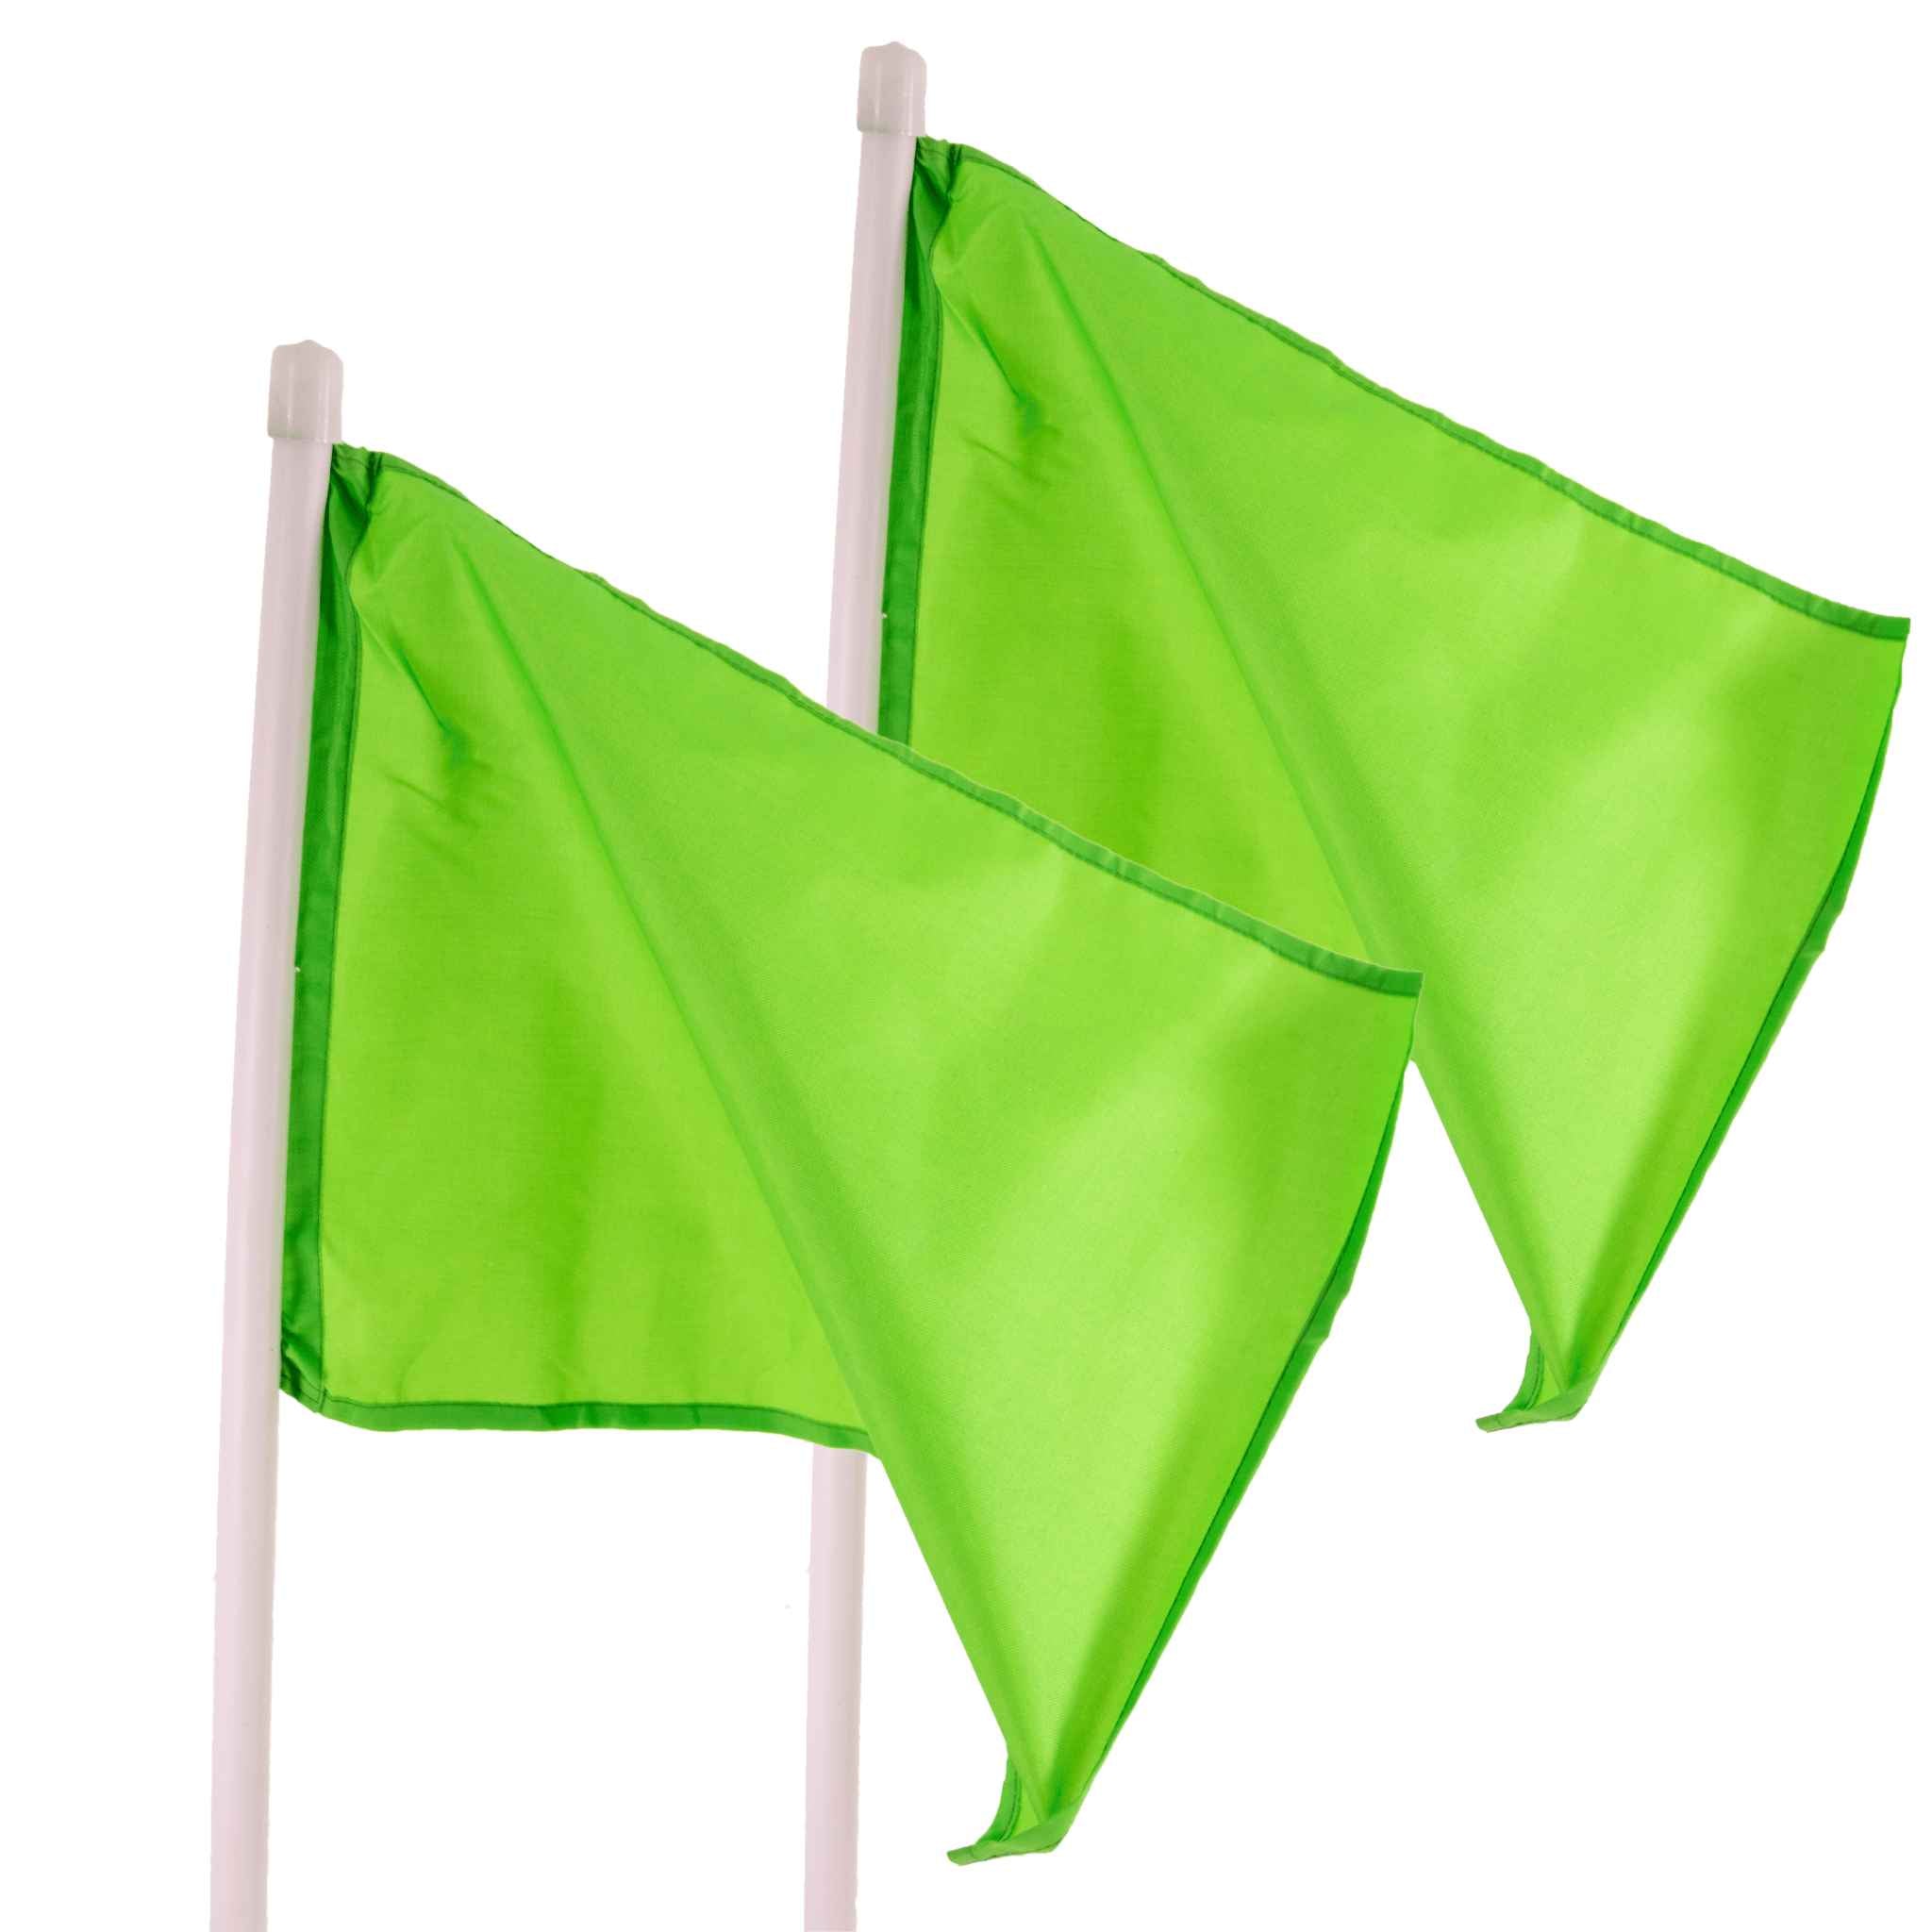 Fabric Flags for Athletics Officials and Sports Use | Simple solid handle | Pair of Green